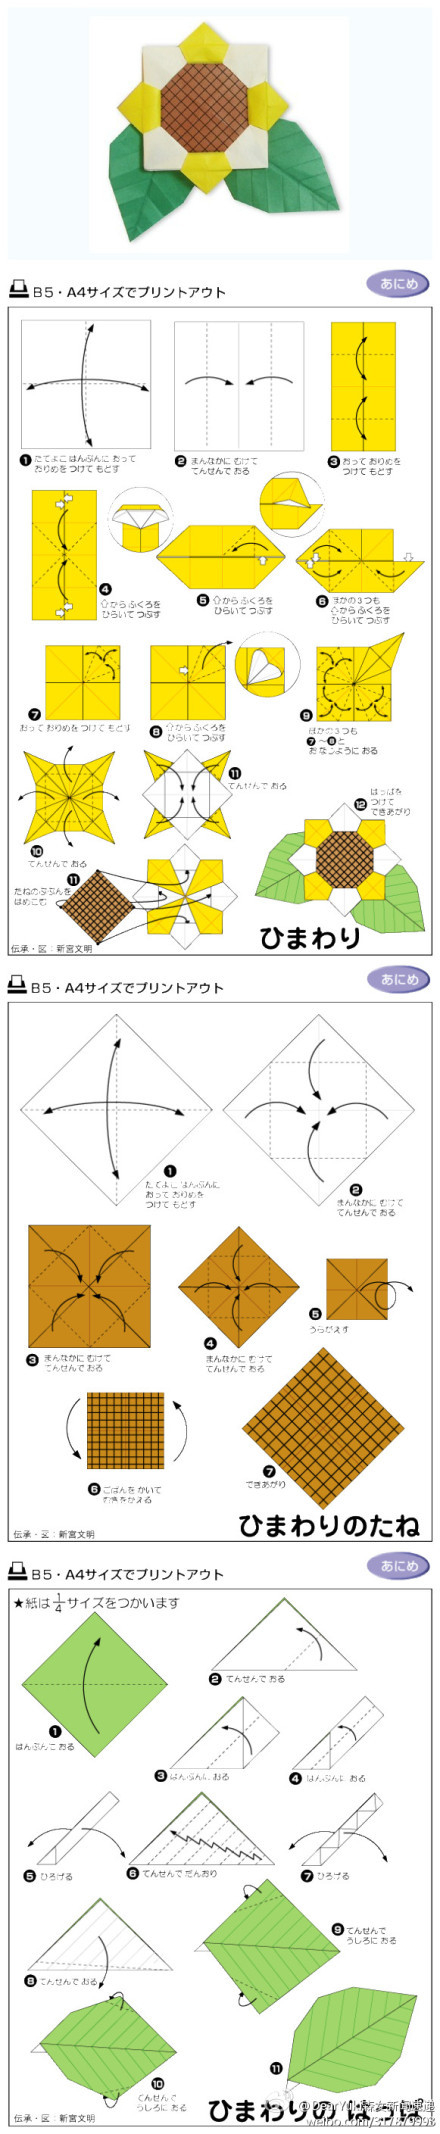 Simple Origami Instructions Origami Simple Sunflower Folding Instructions Origami Instruction